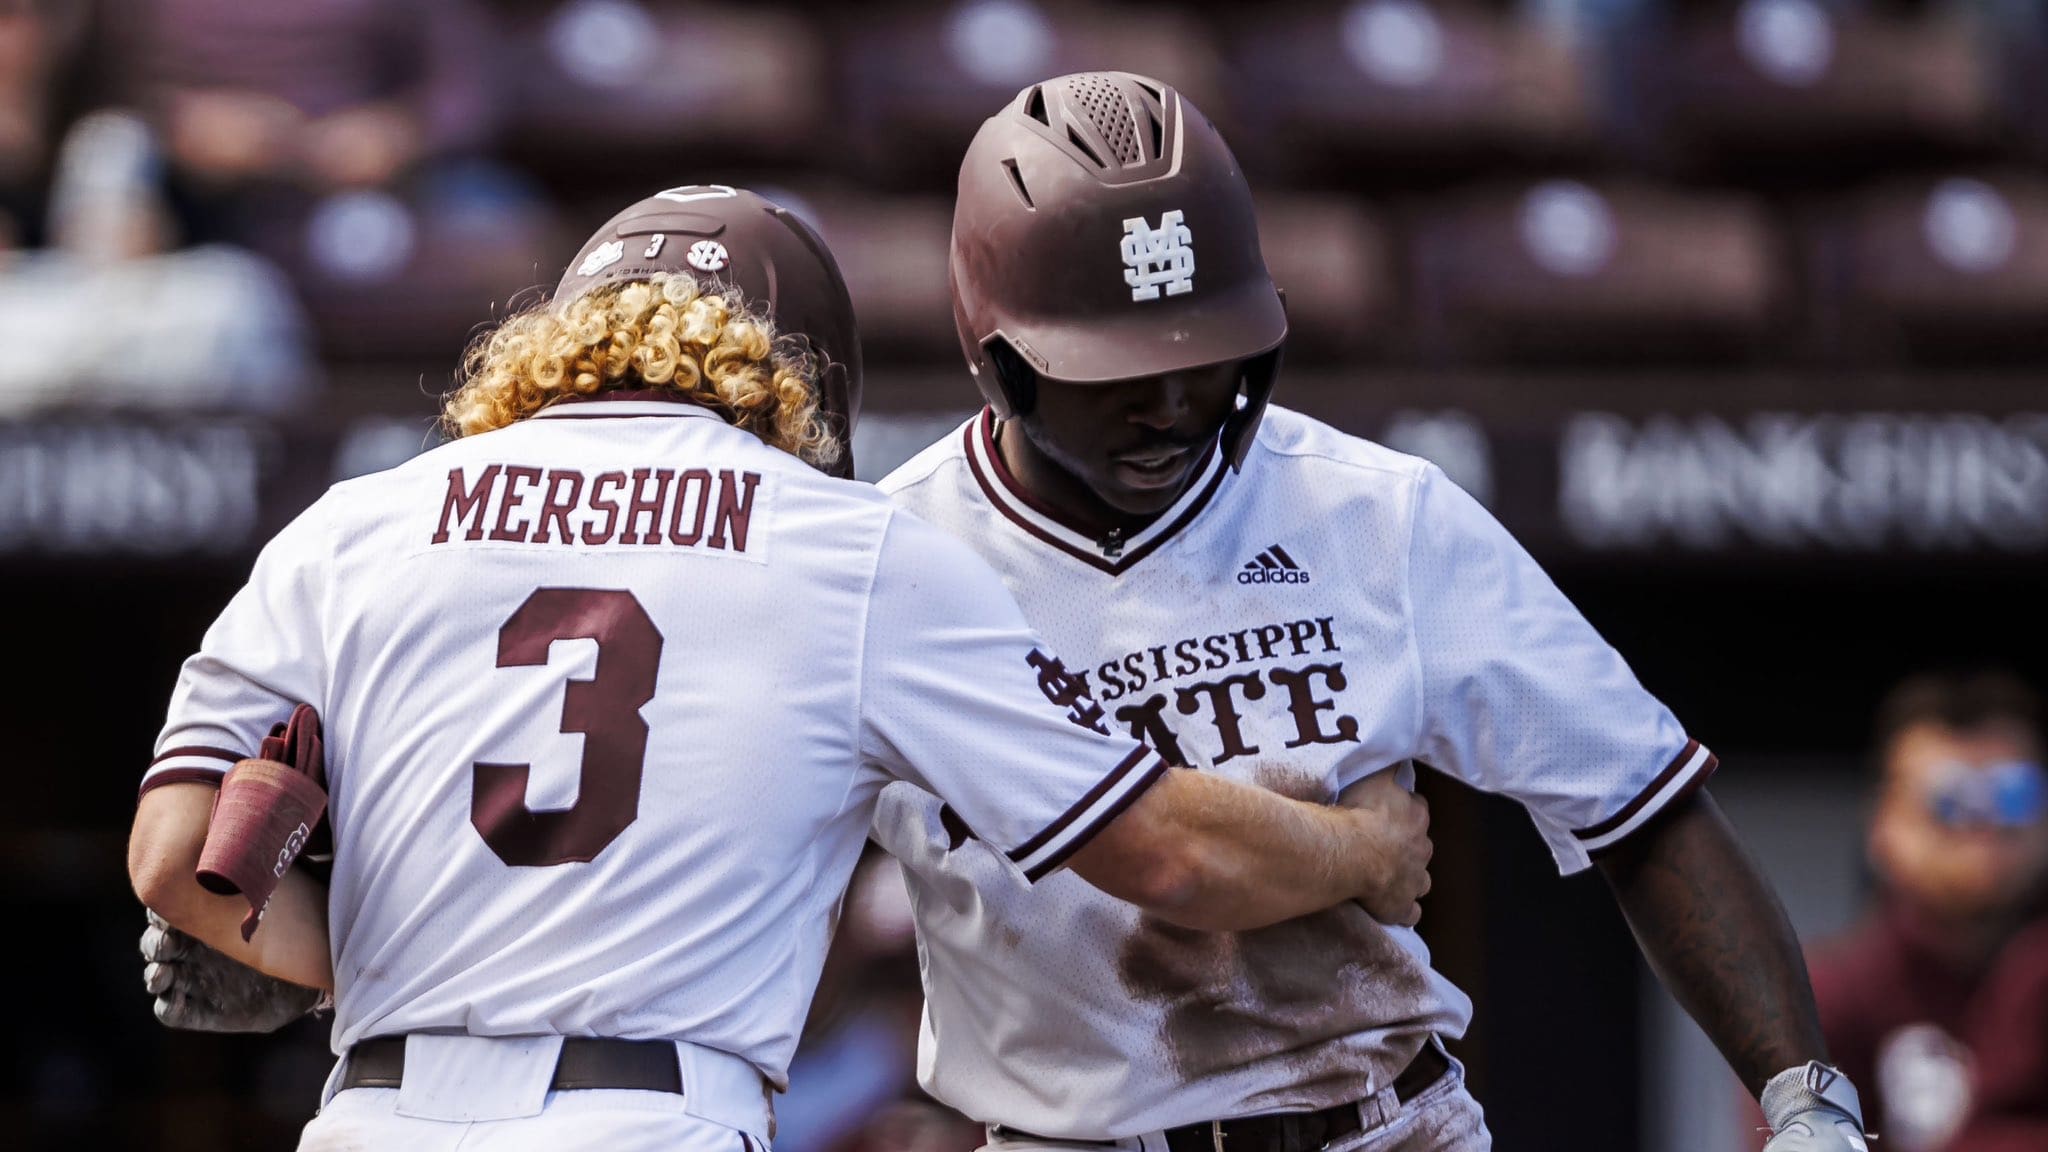 Mississippi State Storms Past Vanderbilt in 8-7 Victory: A Road Series Win